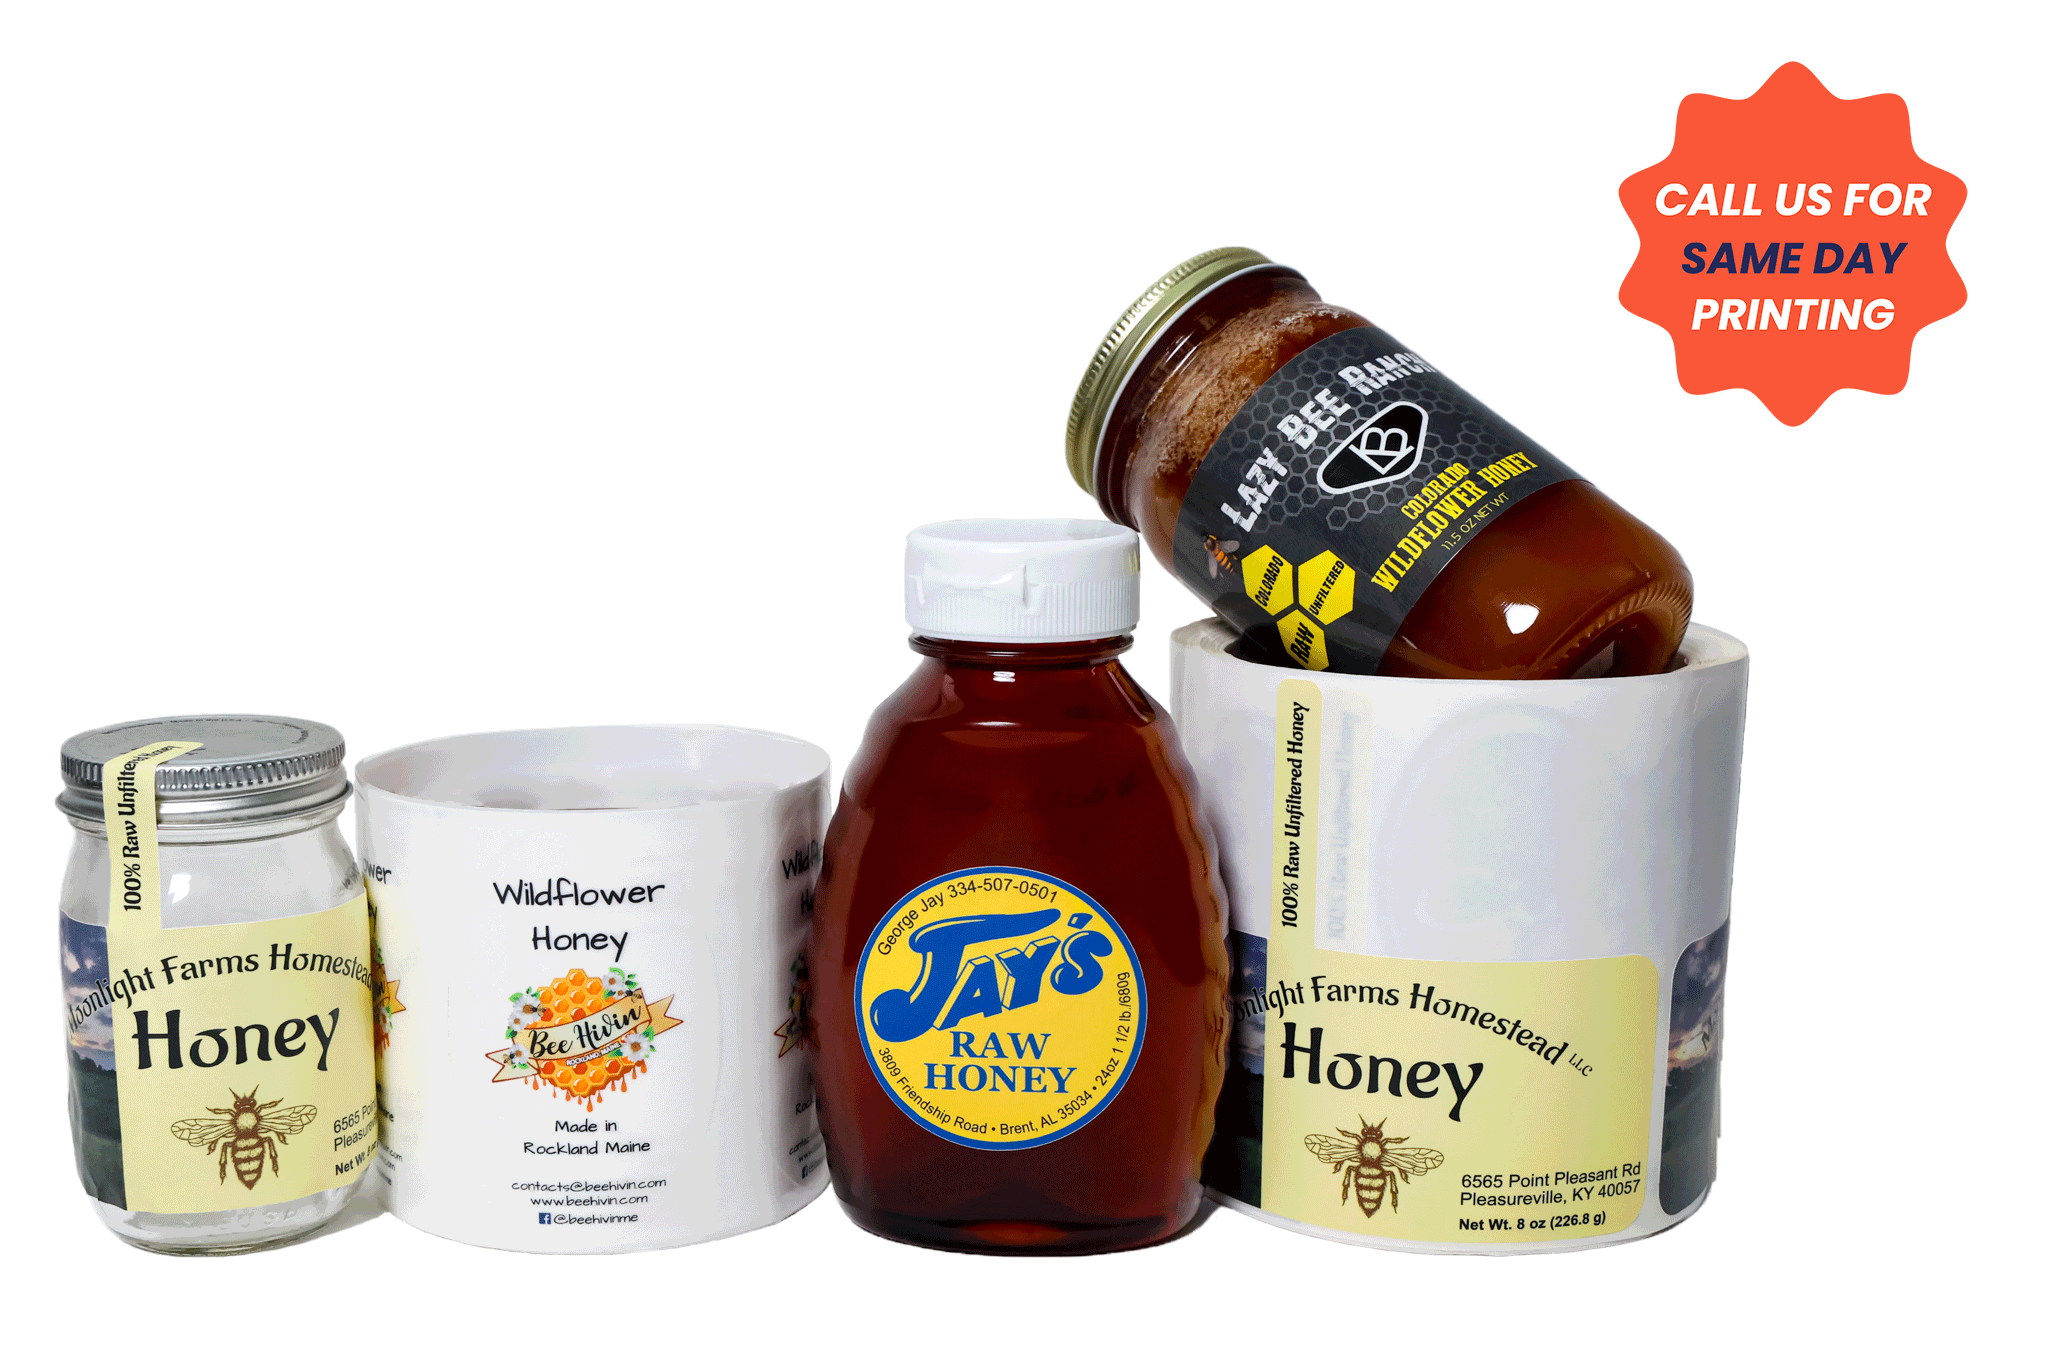 Durable and High-quality Honey Labels